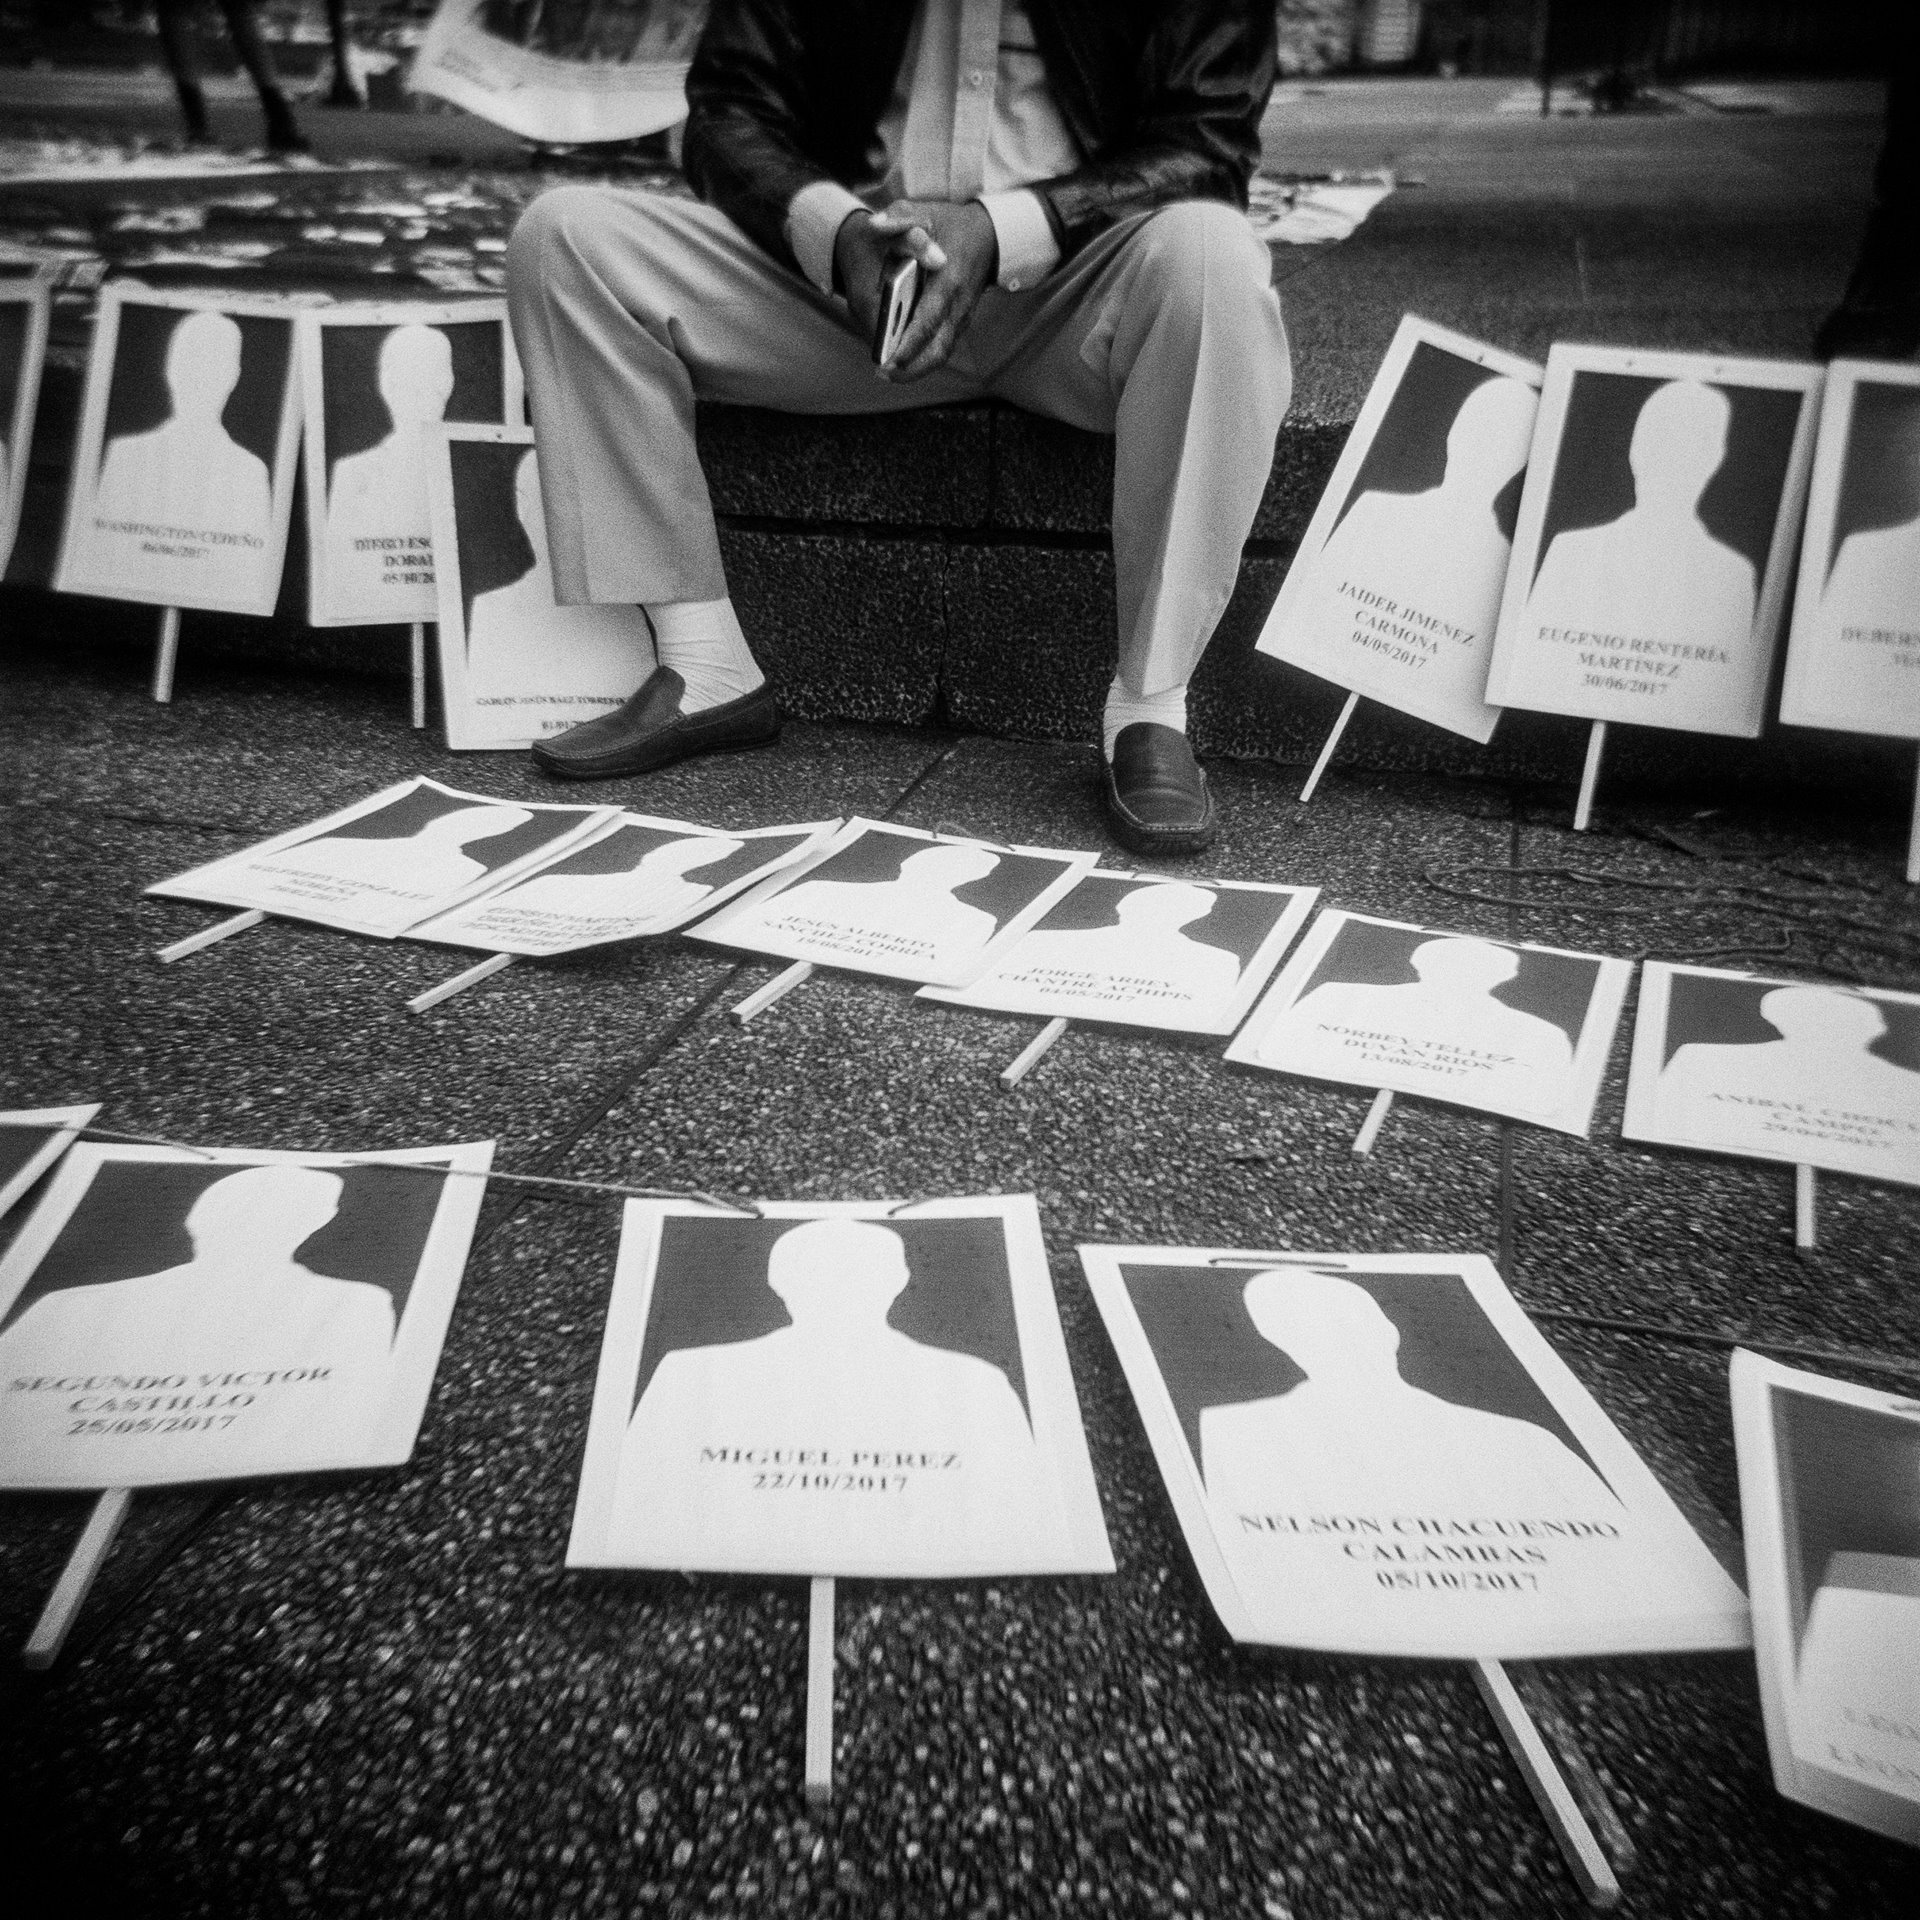 Members of the National Movement of Victims of State Crimes (MOVICE) protest in front of the Prosecutor&#39;s Office in Bogotá, Colombia. The protest was organized in response to an increase in the number of murders and disappearances of social leaders and human rights activists, as well as of former Revolutionary Armed Forces of Colombia (FARC) combatants demobilized after the 2016 peace agreement with the Colombian government. Hundreds of former FARC combatants had been killed since the agreement, and the United Nations Office for Human Rights in Colombia had also received information about the assassination of 120 human rights defenders.